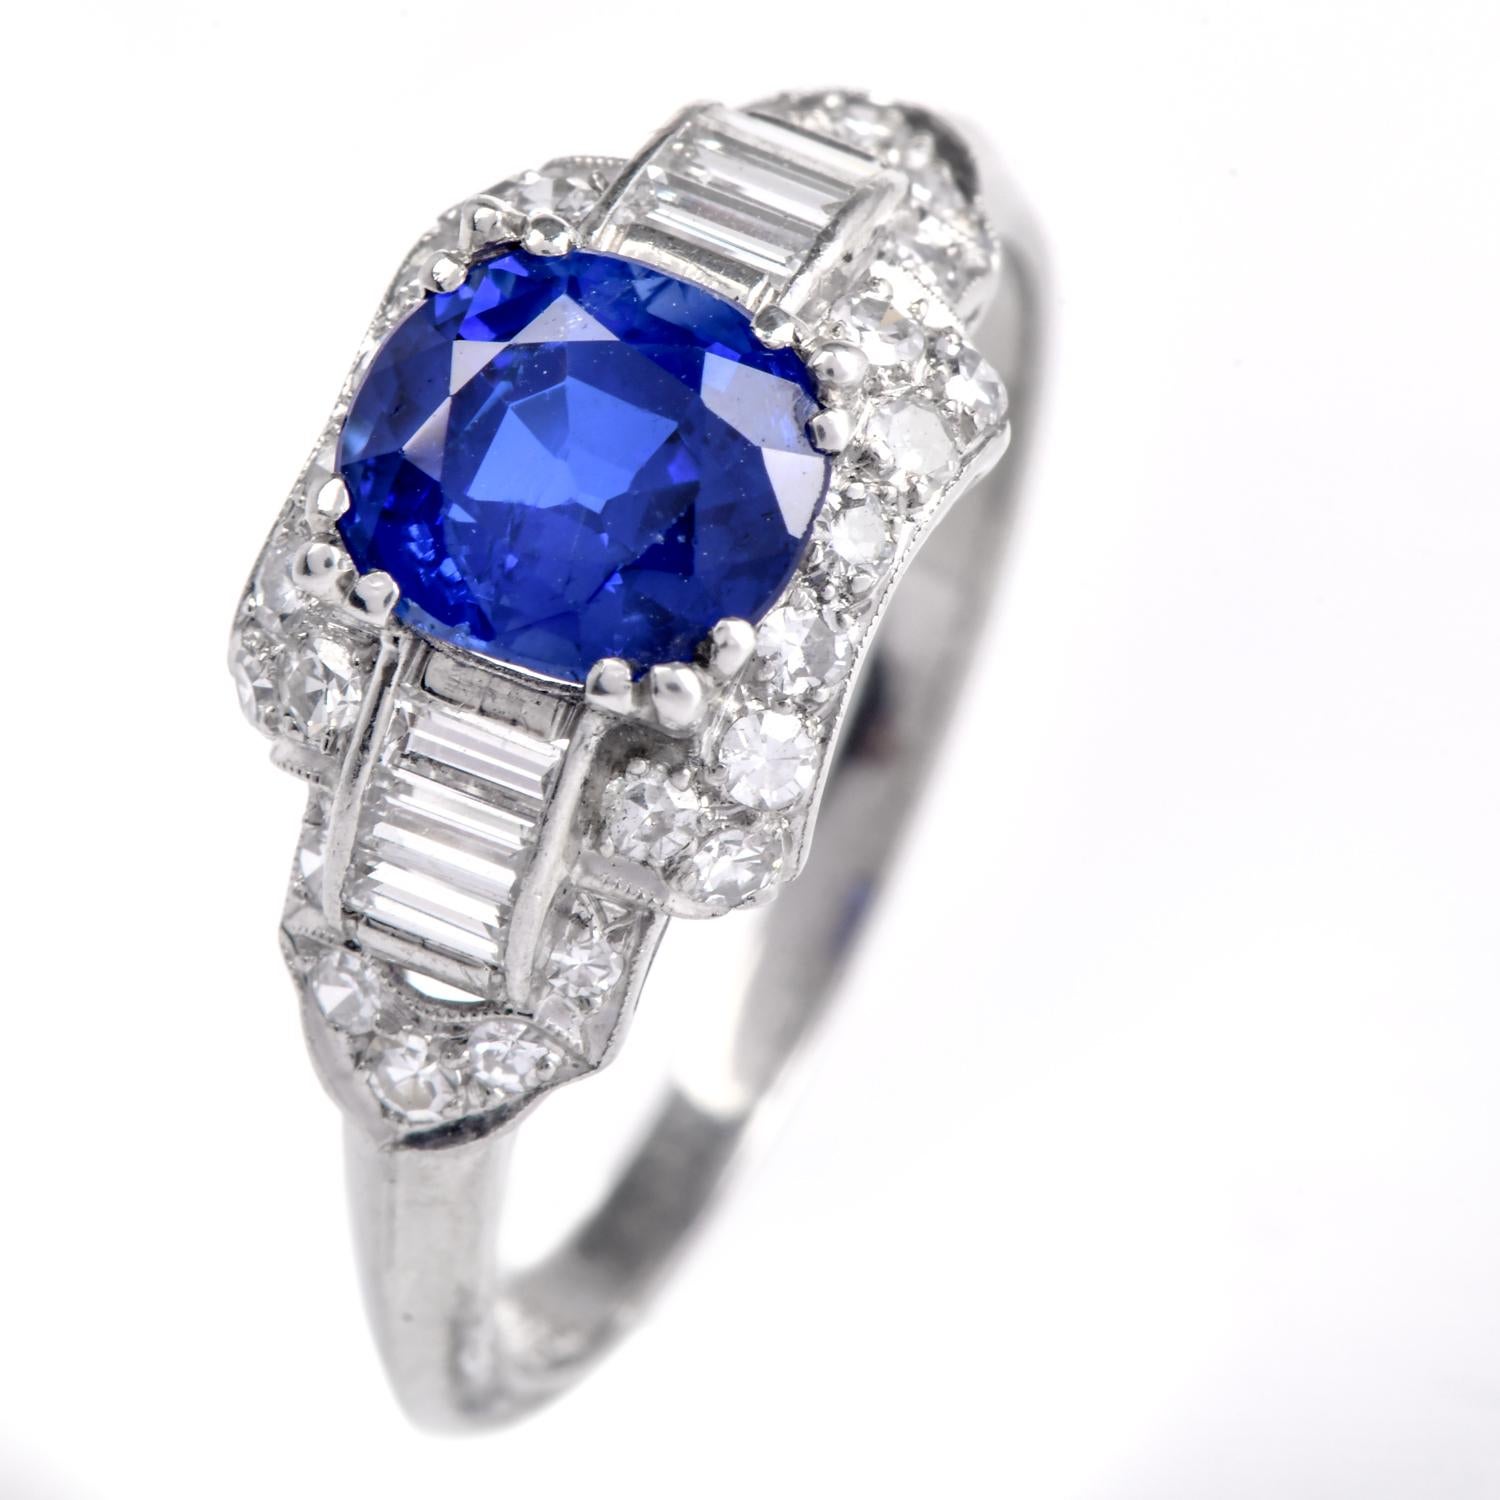 Very Rare Certified Kashmir No Heat Sapphire 2.53cts Diamond Platinum Ring

Presenting this vintage ring adorned with diamonds, and Natural No-Heat Kashmir sapphire, crafted in Platinum

GIA Certified Blue No Heat Kashmir Sapphire is the heart of